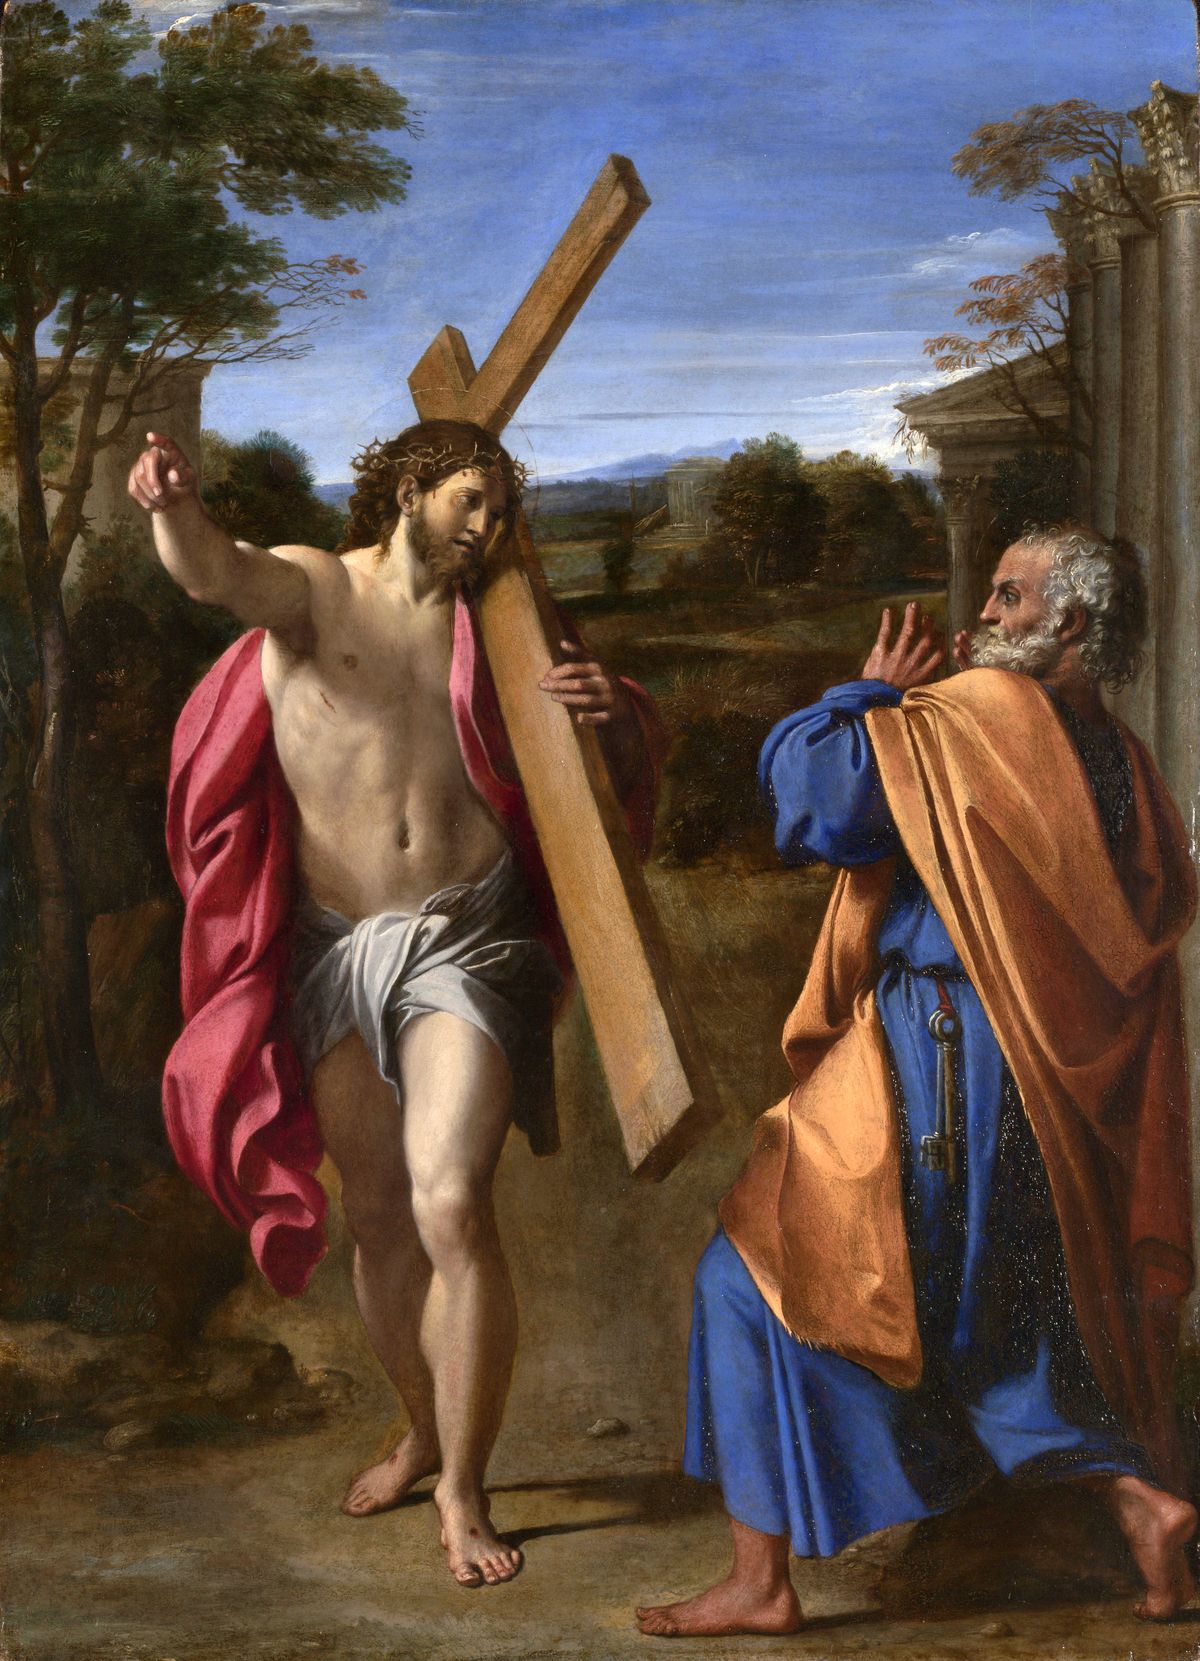 Christ appearing to Saint Peter on the Appian Way by Annibale Carracci (1602) - Public Domain Catholic Painting